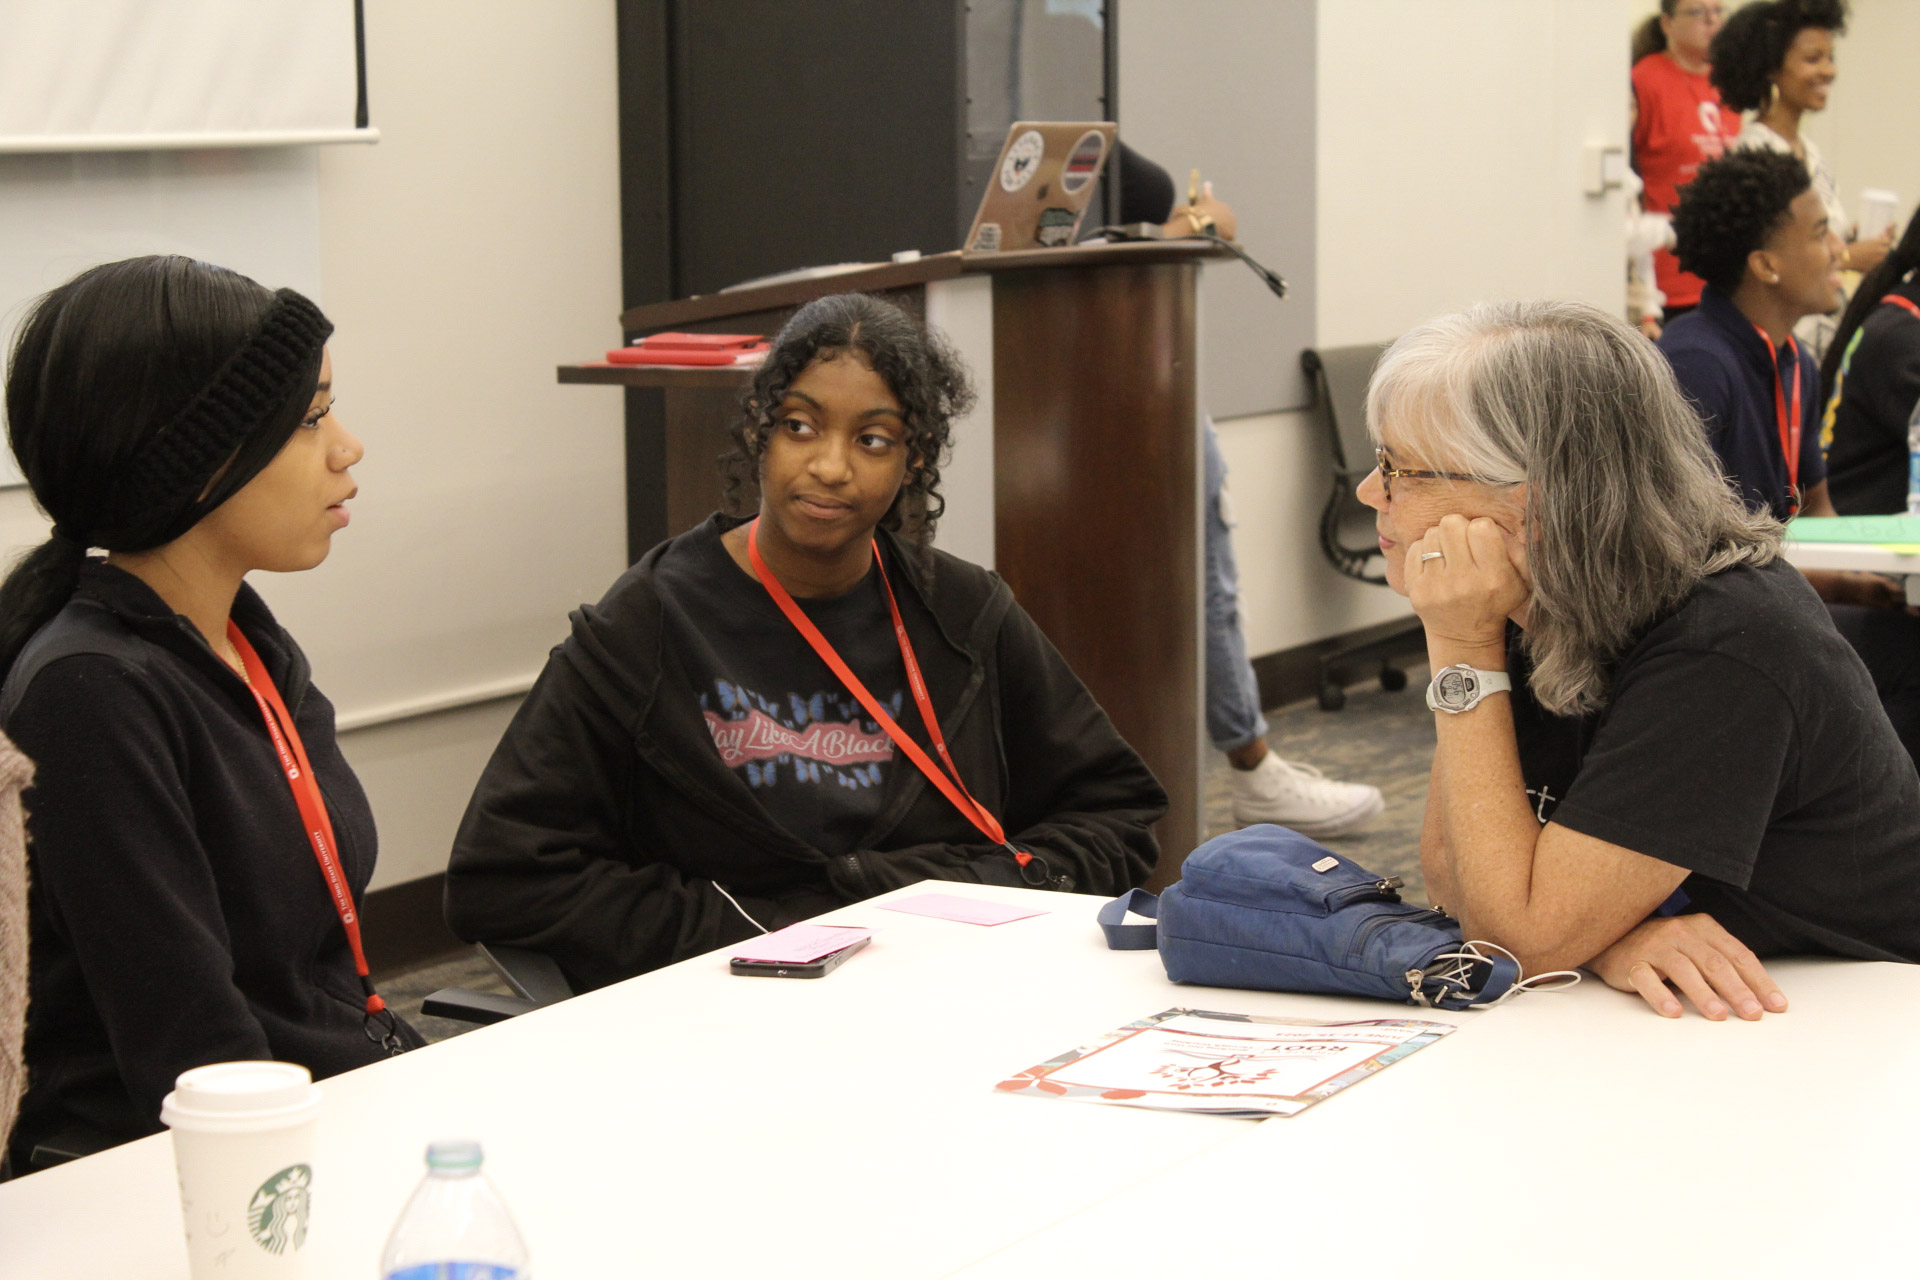 An EHE Faculty member leans in to listen to two students sitting at a table.